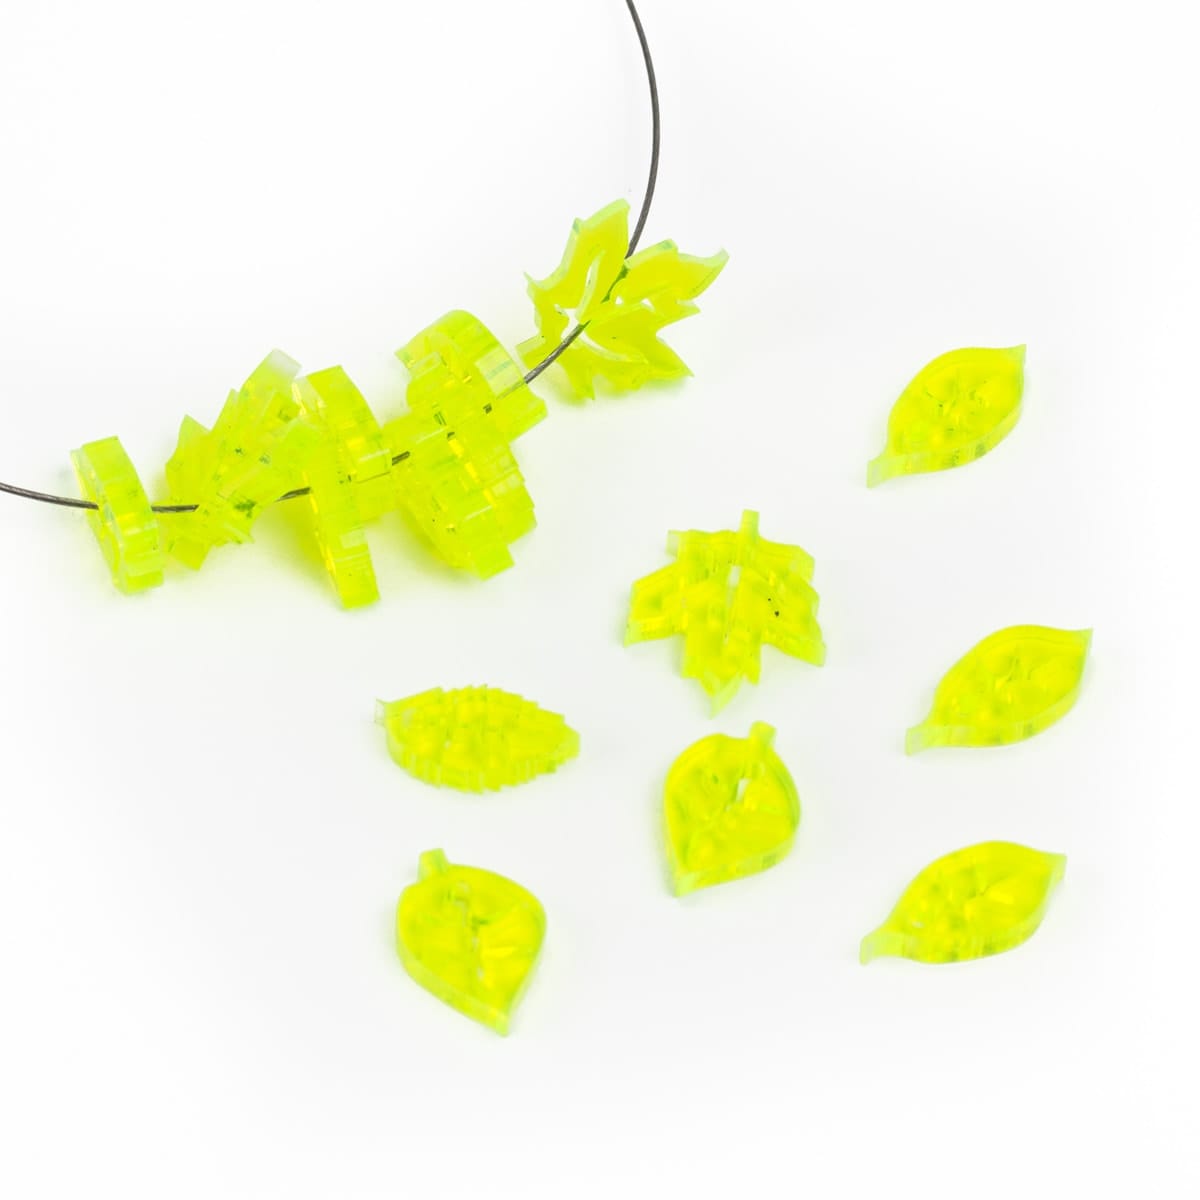 Neon Green Translucent Acrylic example product.